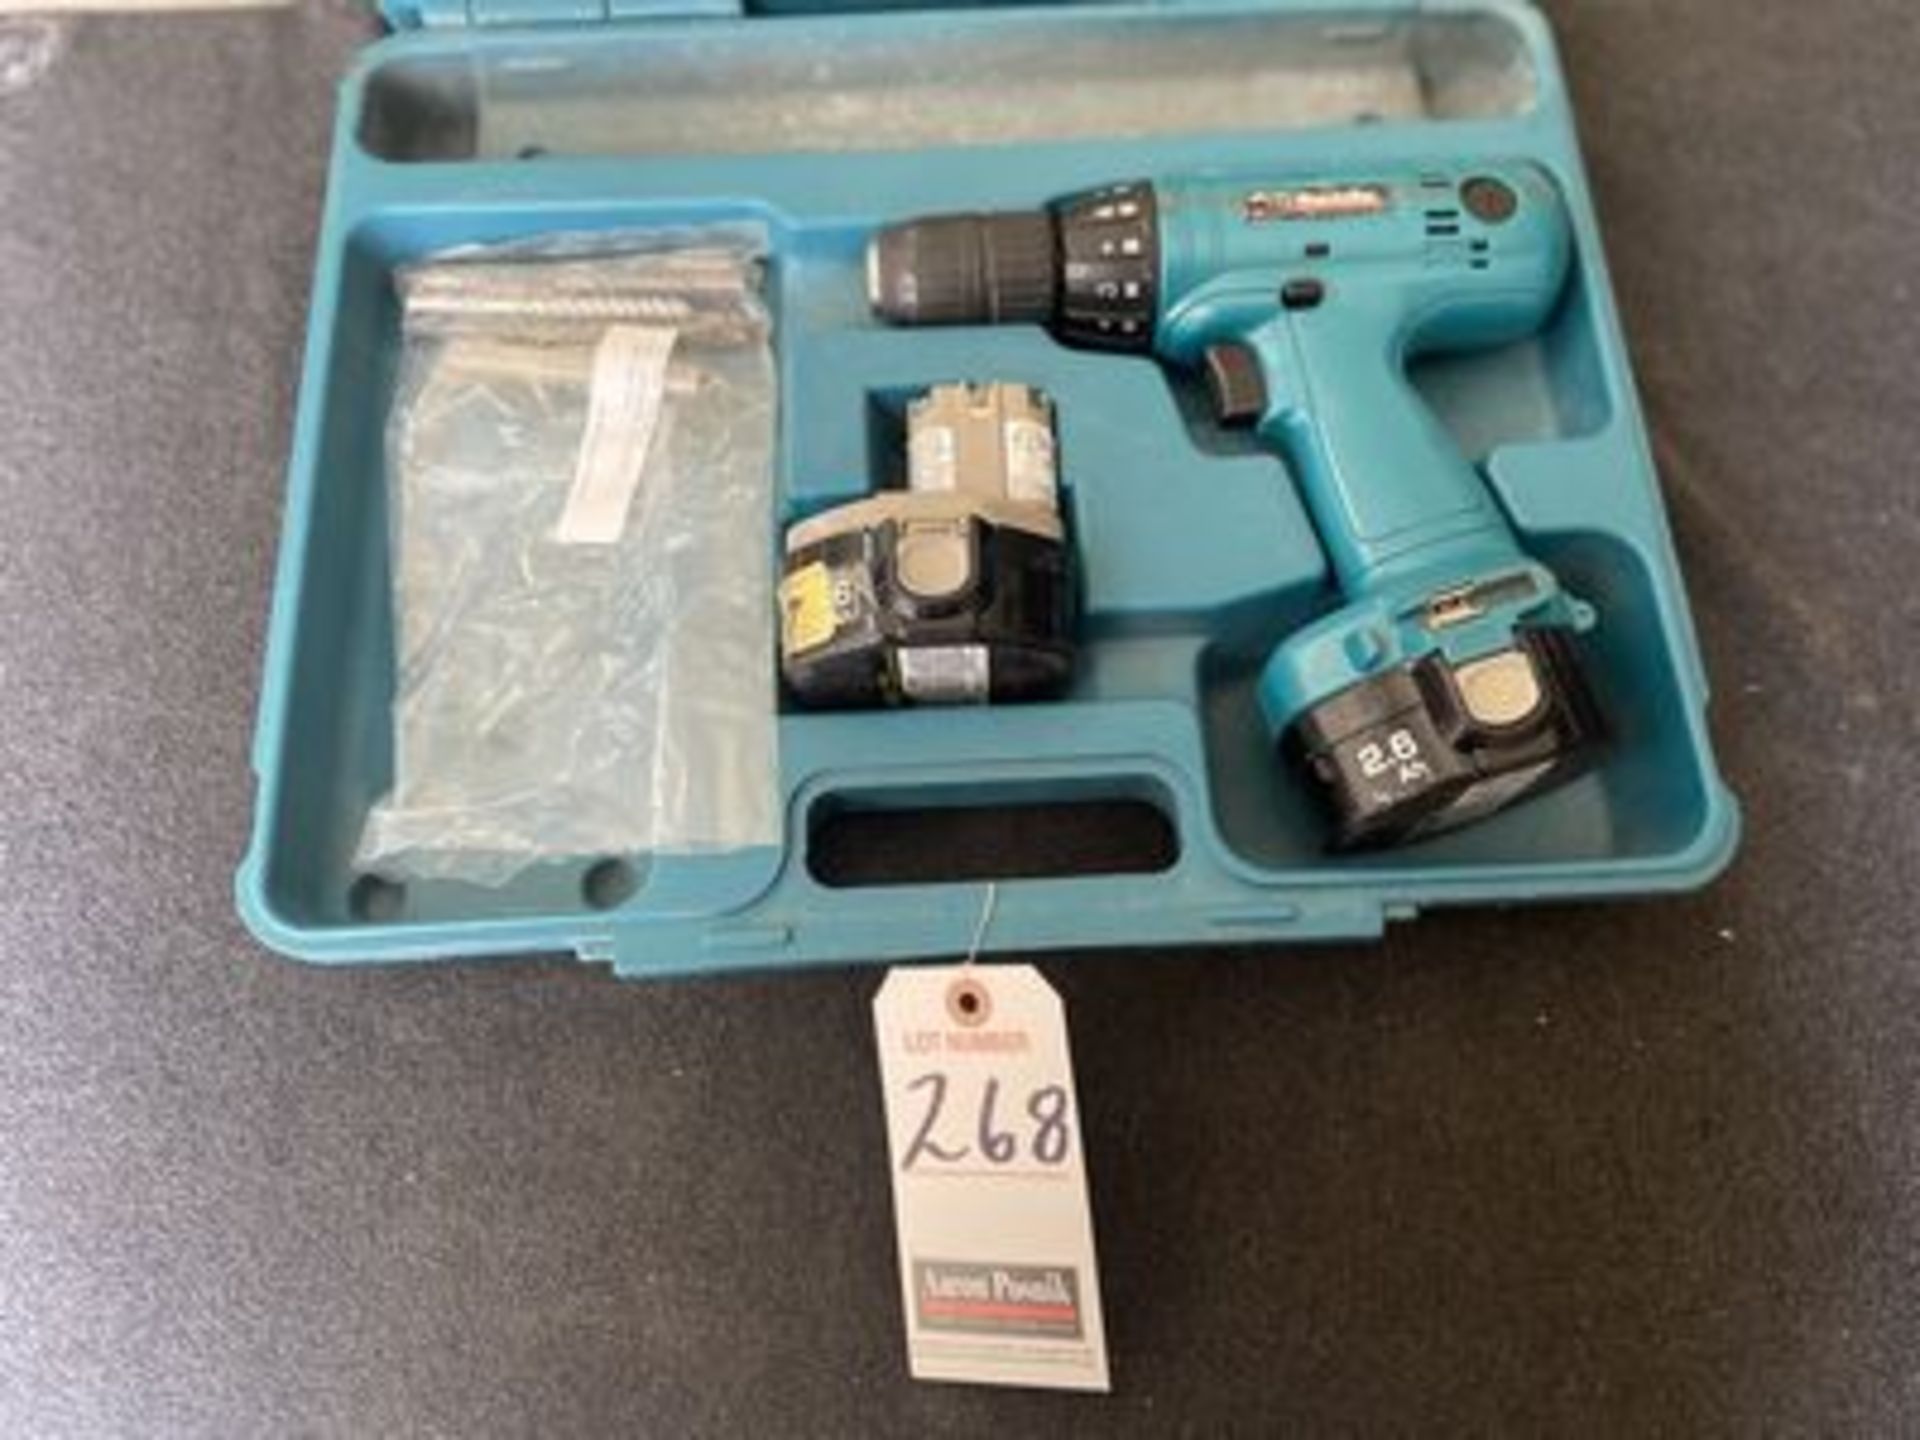 MAKITA 14.4V CORDLESS DRILL W/ CASE, BATTERY & CHARGER, M/N 1434